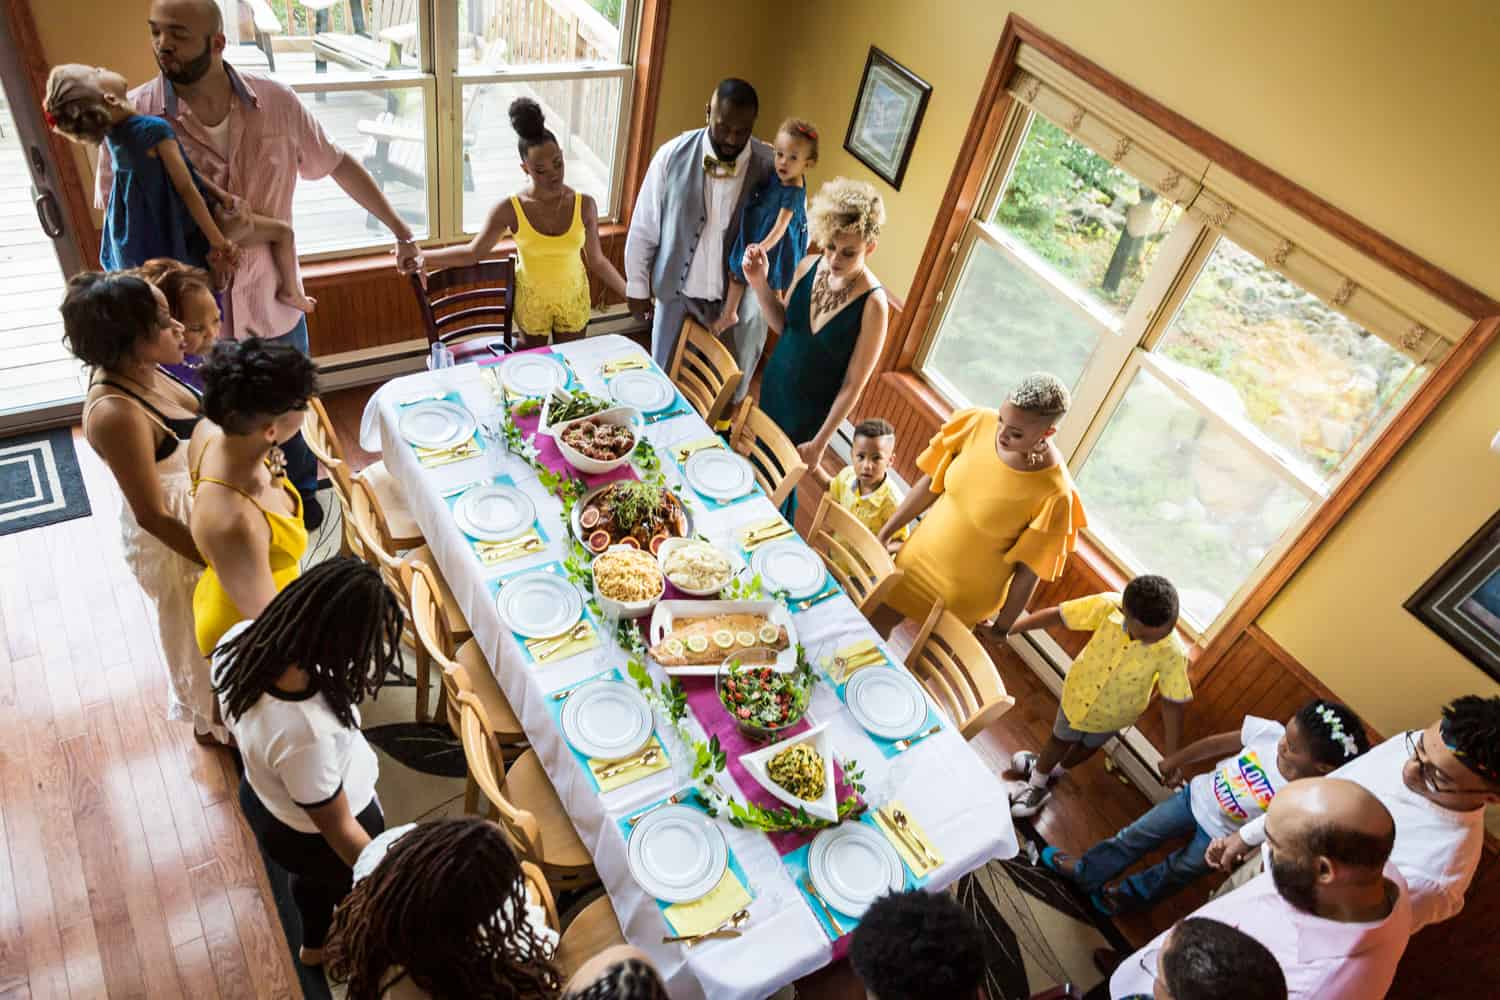 Family holding hands and praying around dinner table during a family reunion portrait